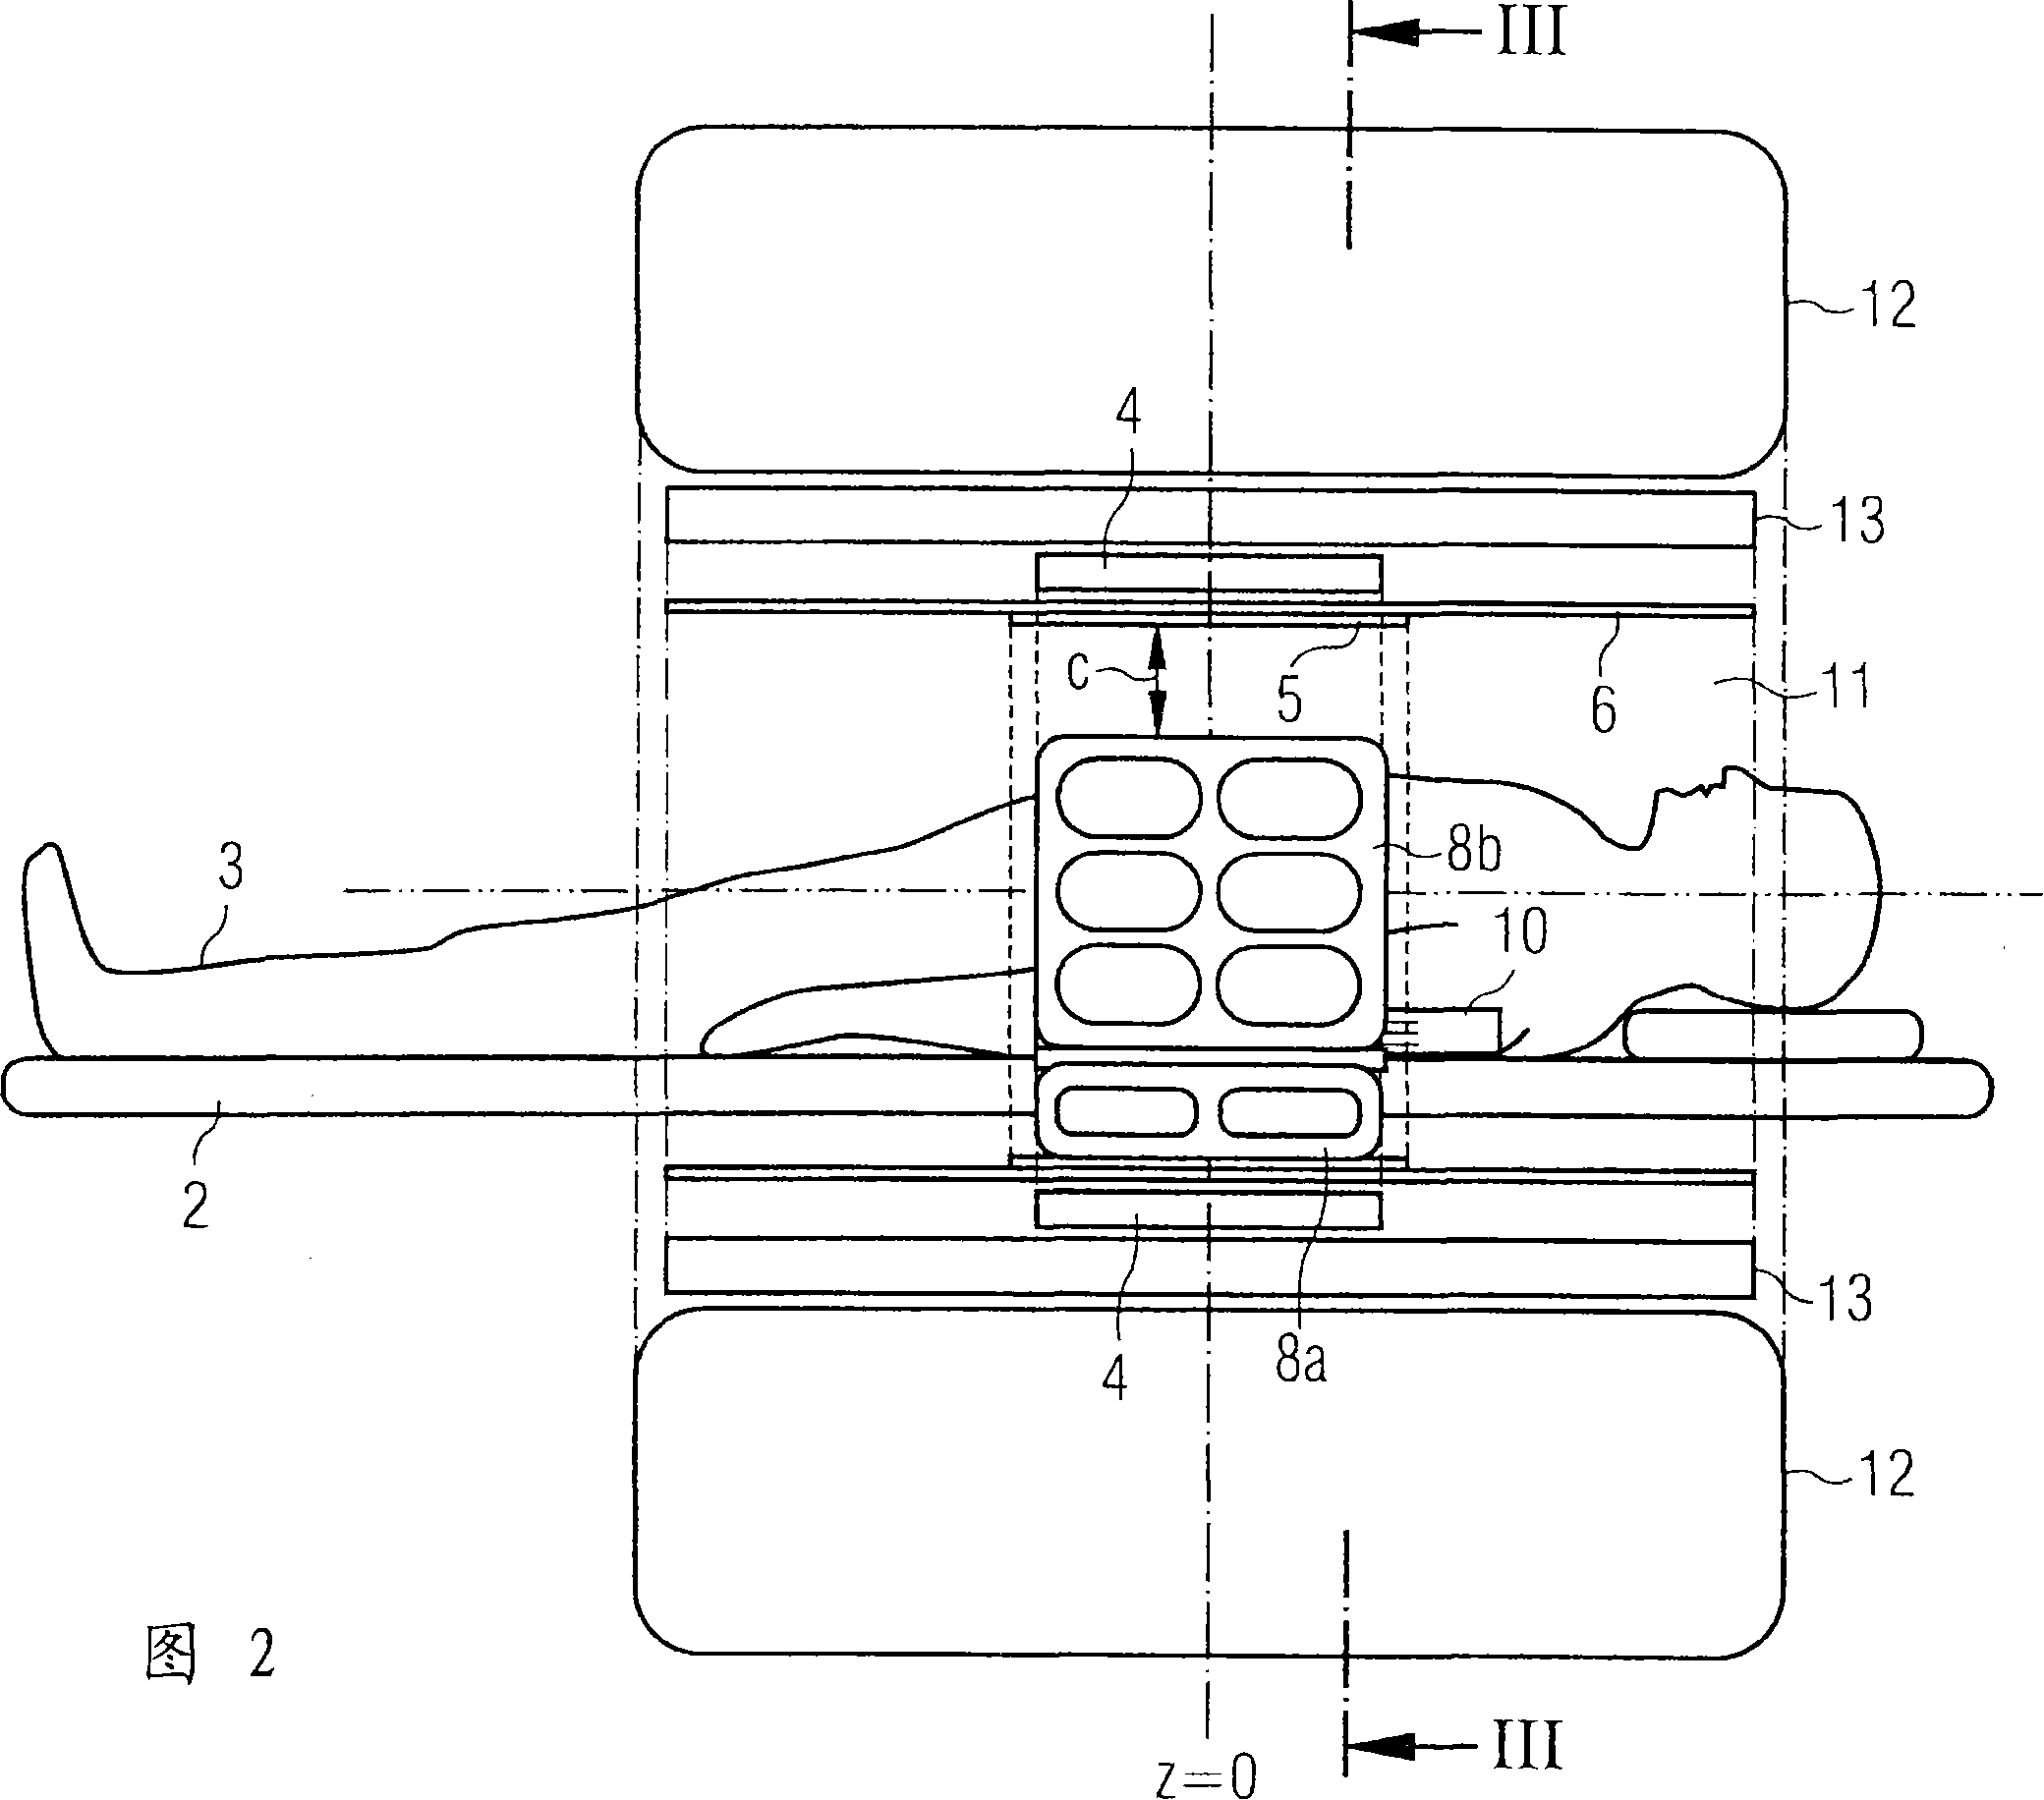 Field generating unit of a combined MR/PET system